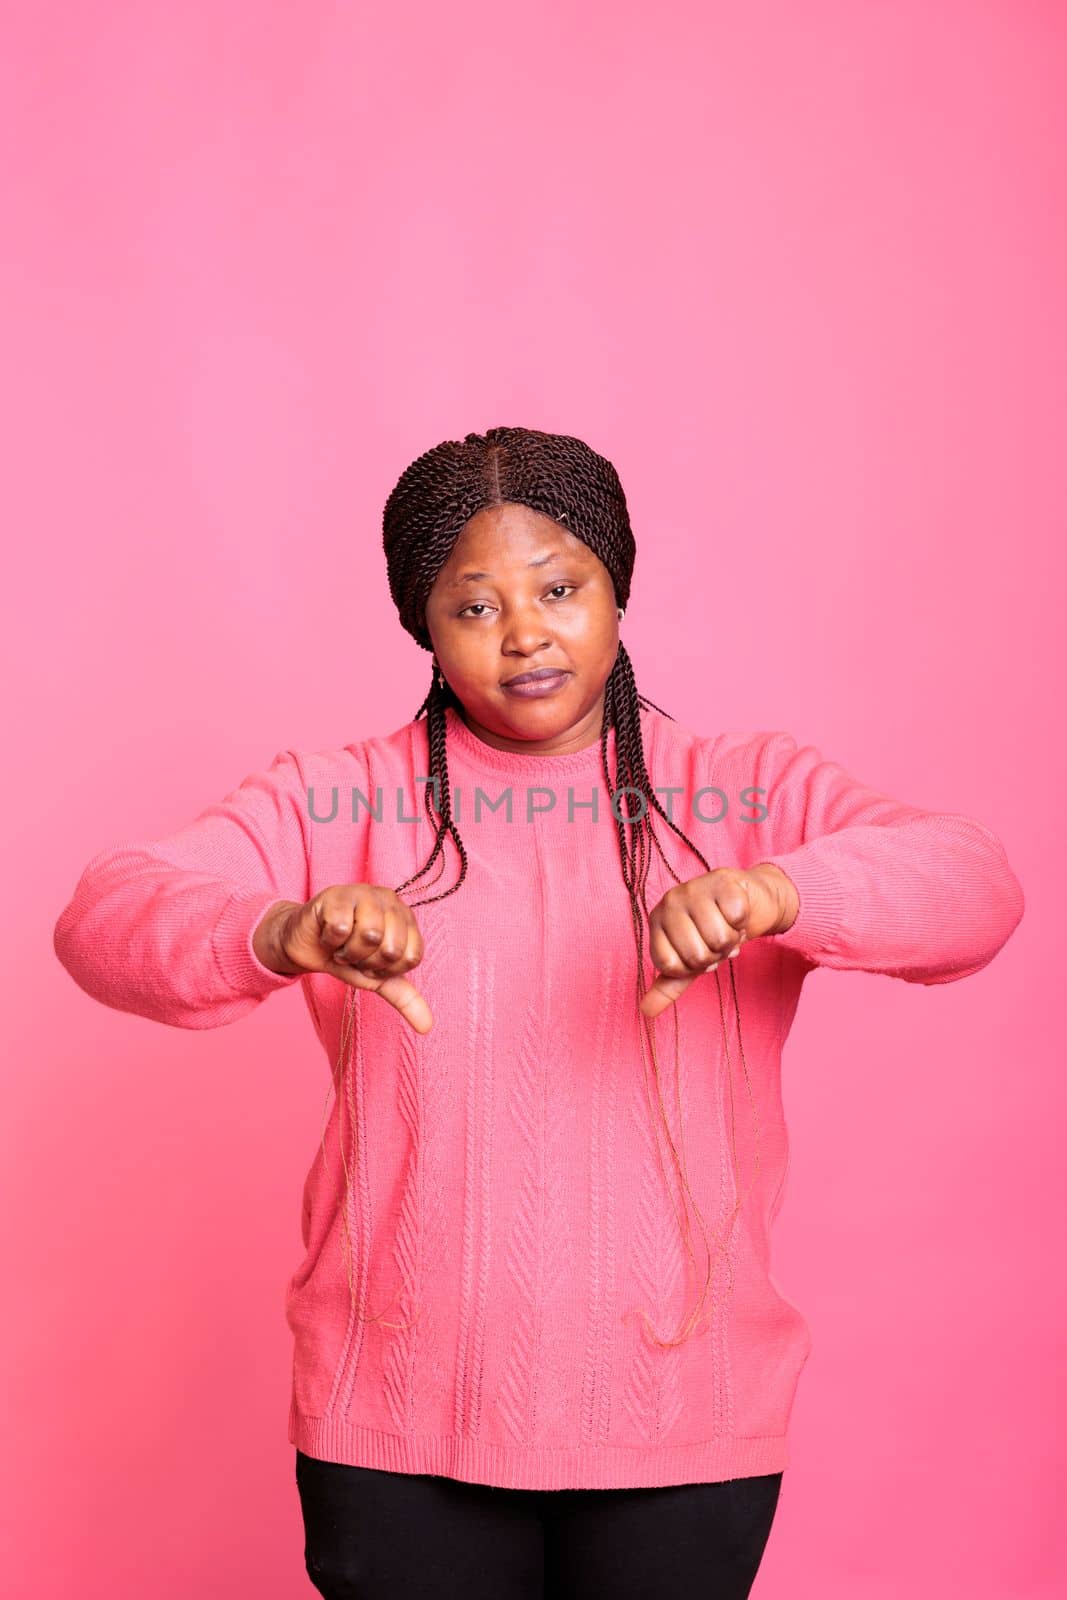 Displeased unhappy woman showing thumbs down gesture on camera in studio, gesturing failure sign with fingers. Dissatisfied person expressing disapproval and disappointment, doing dislike symbol.